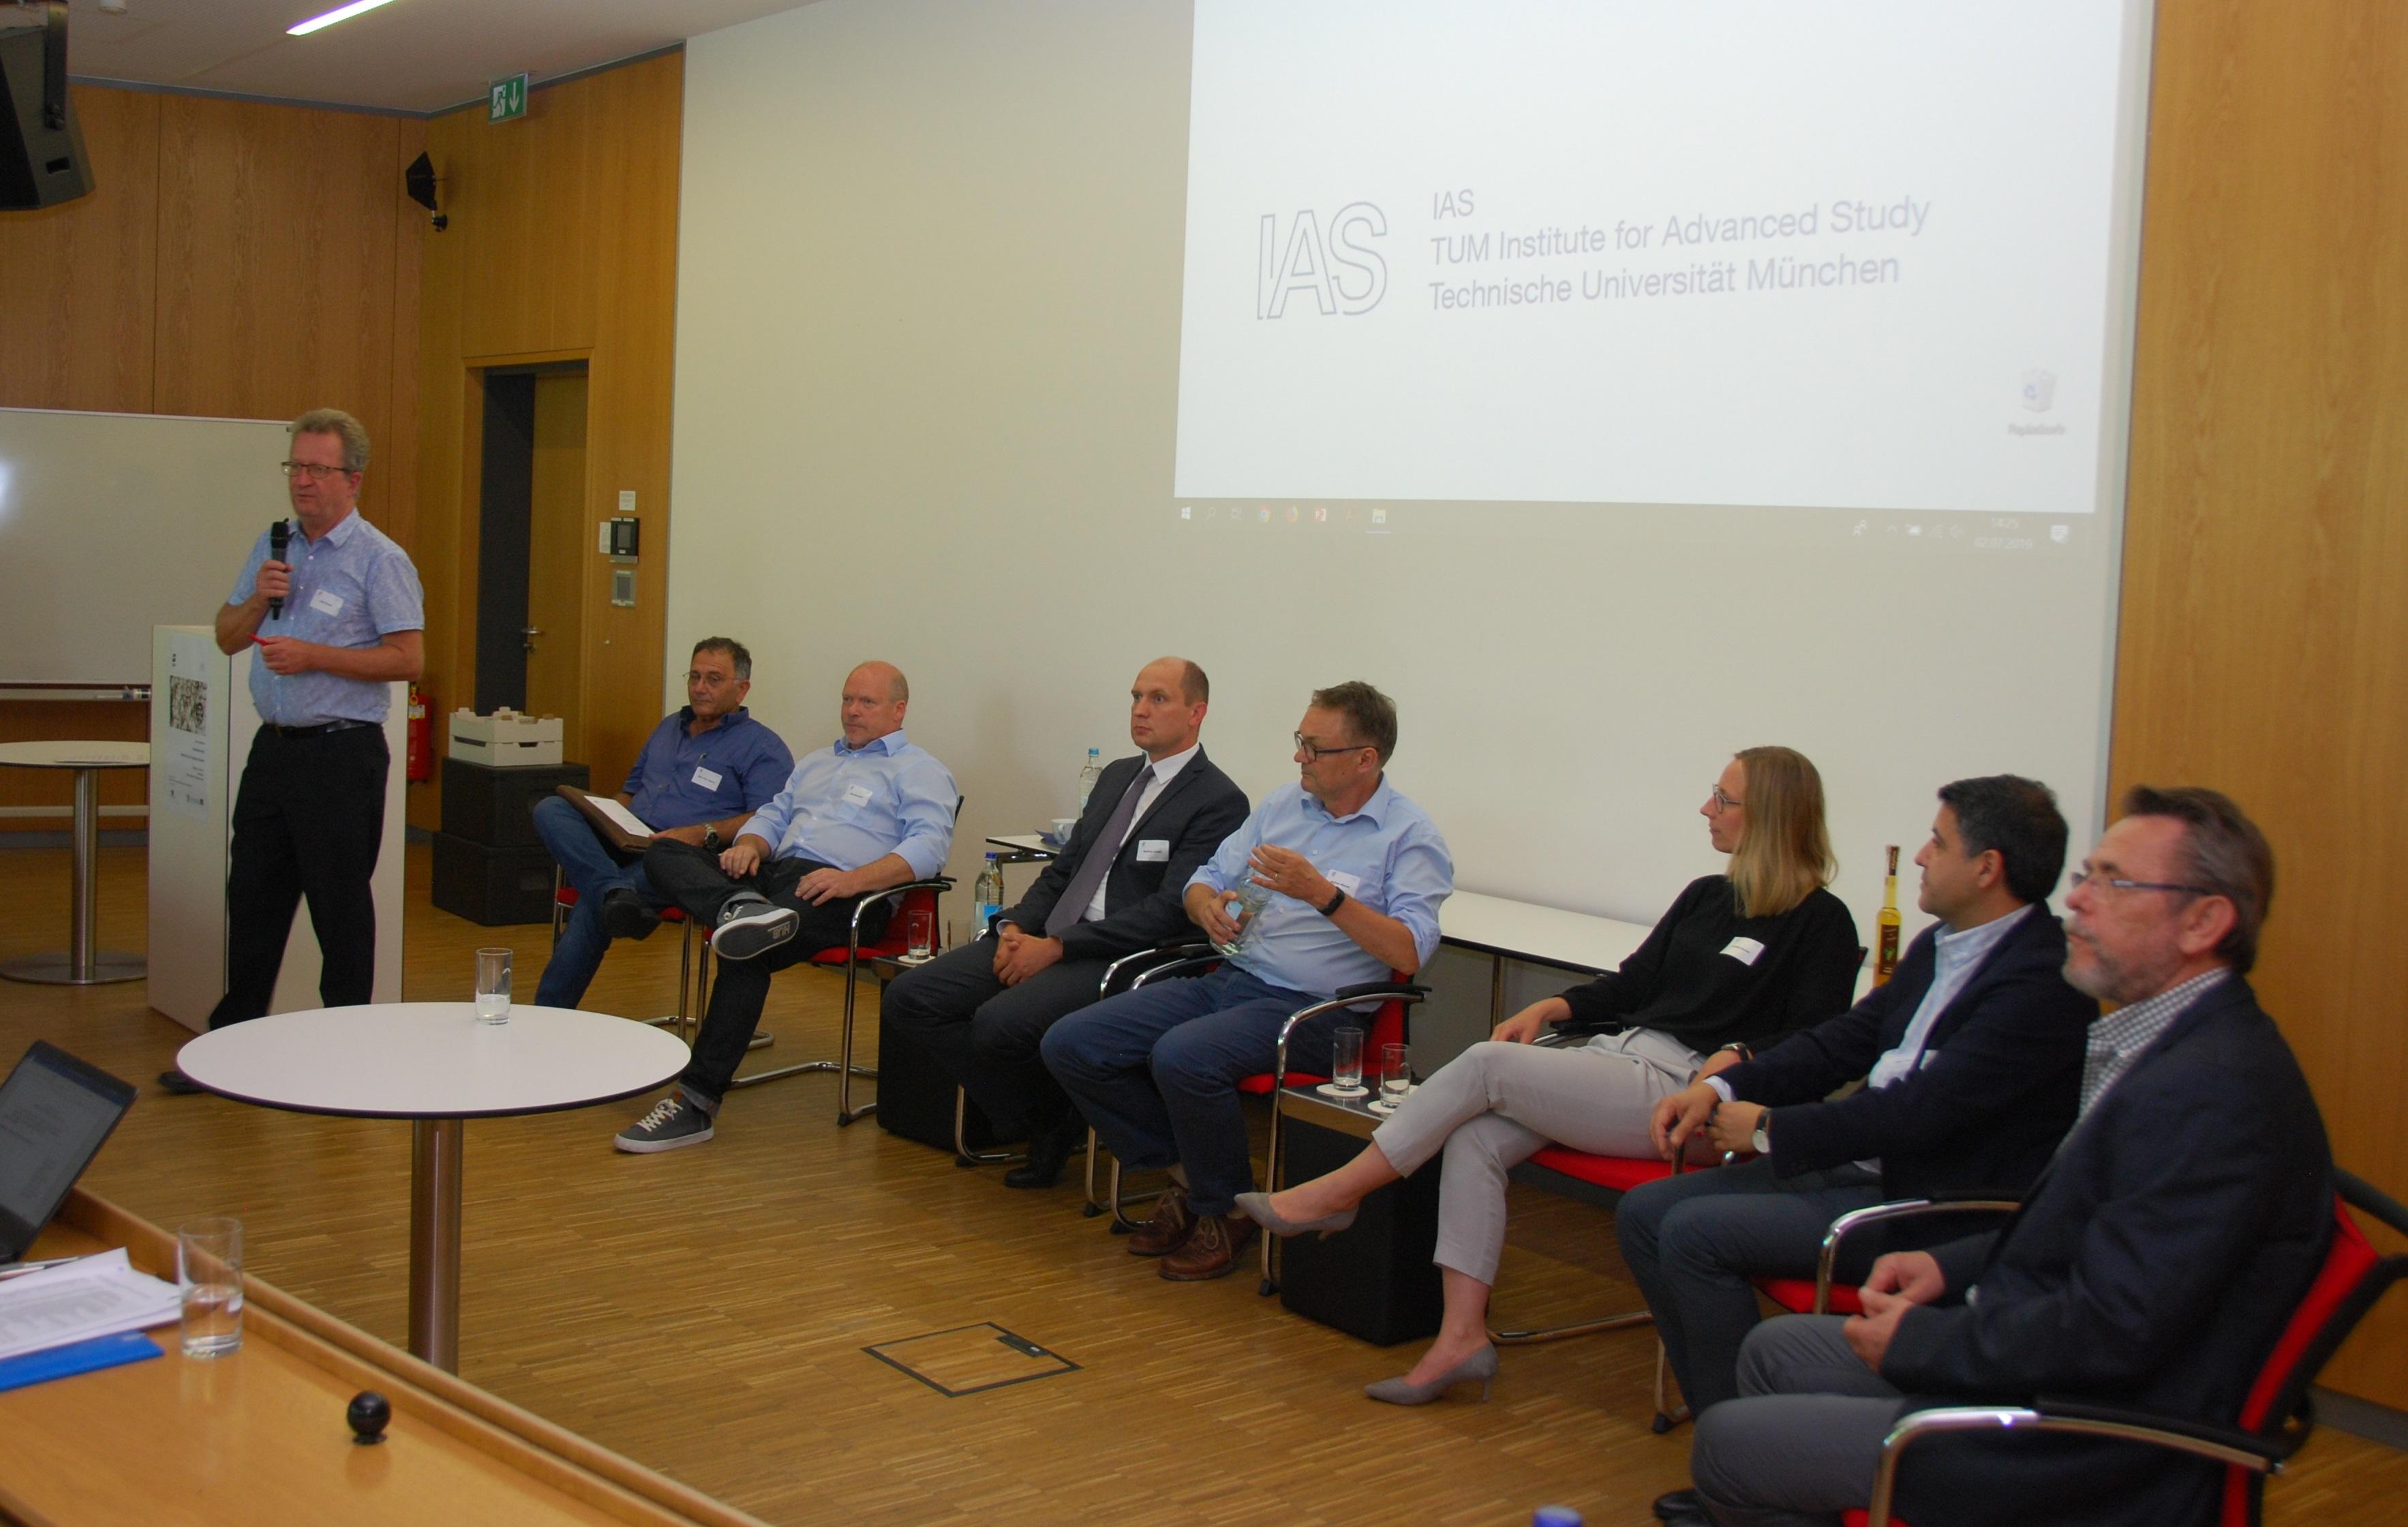 Eight discussants in front of the audience with the logo of TUM-IAS in the background.